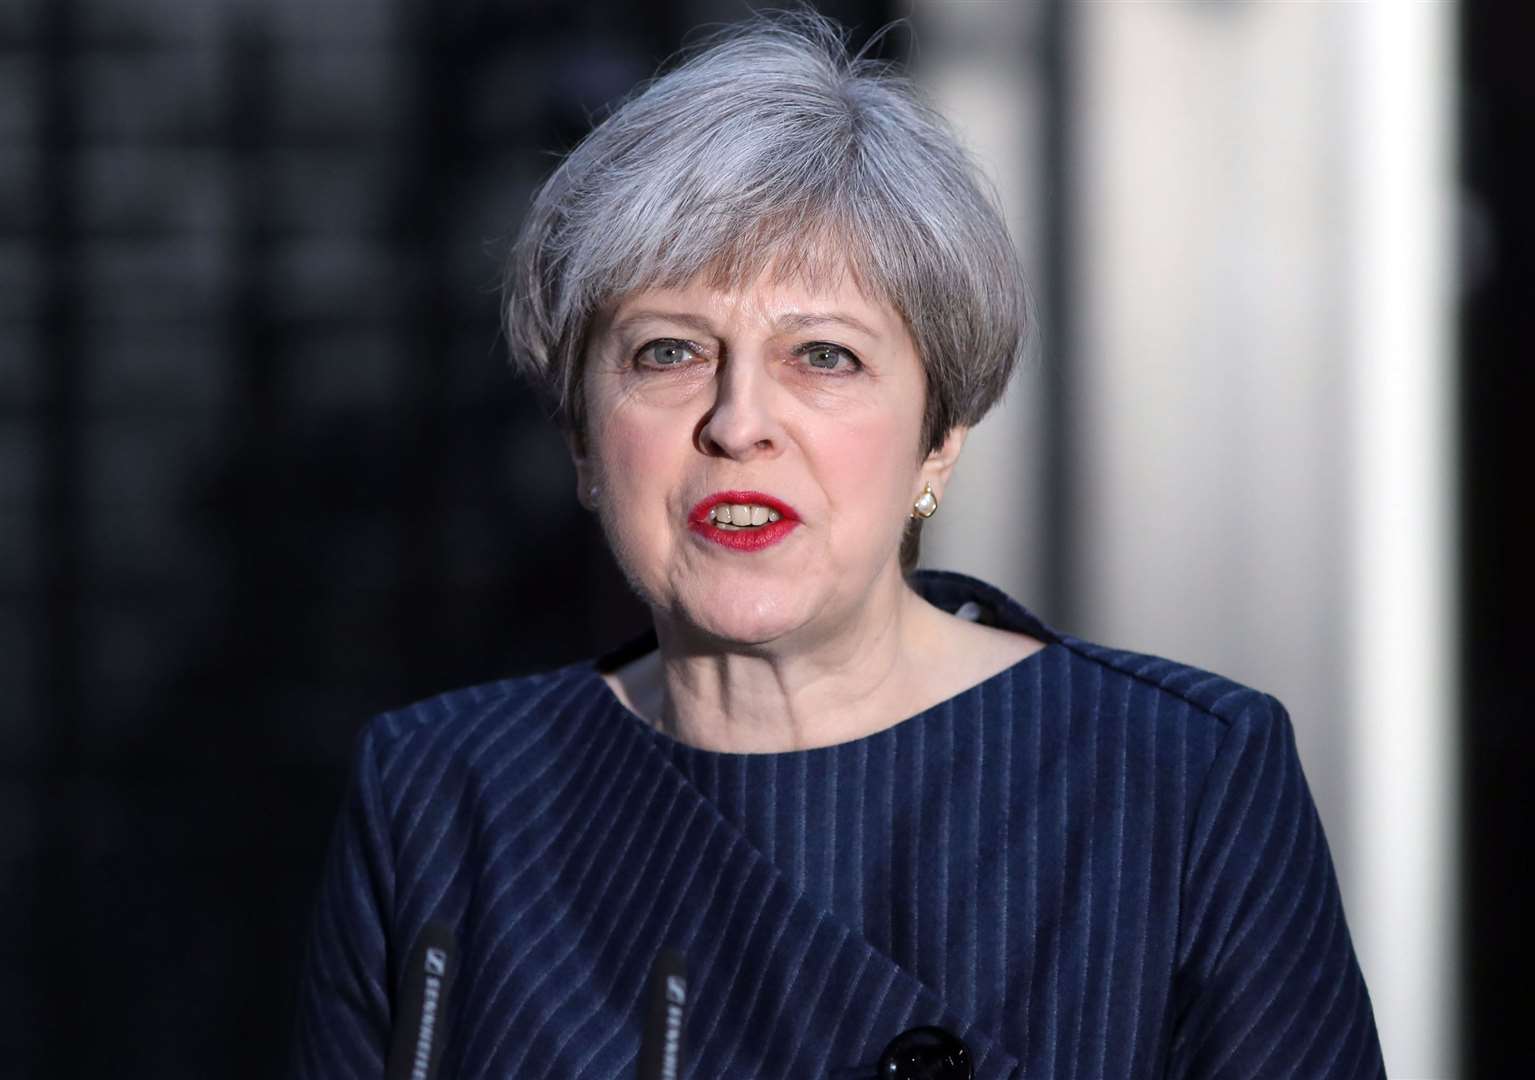 Theresa May failed three times to get her Brexit deal through parliament